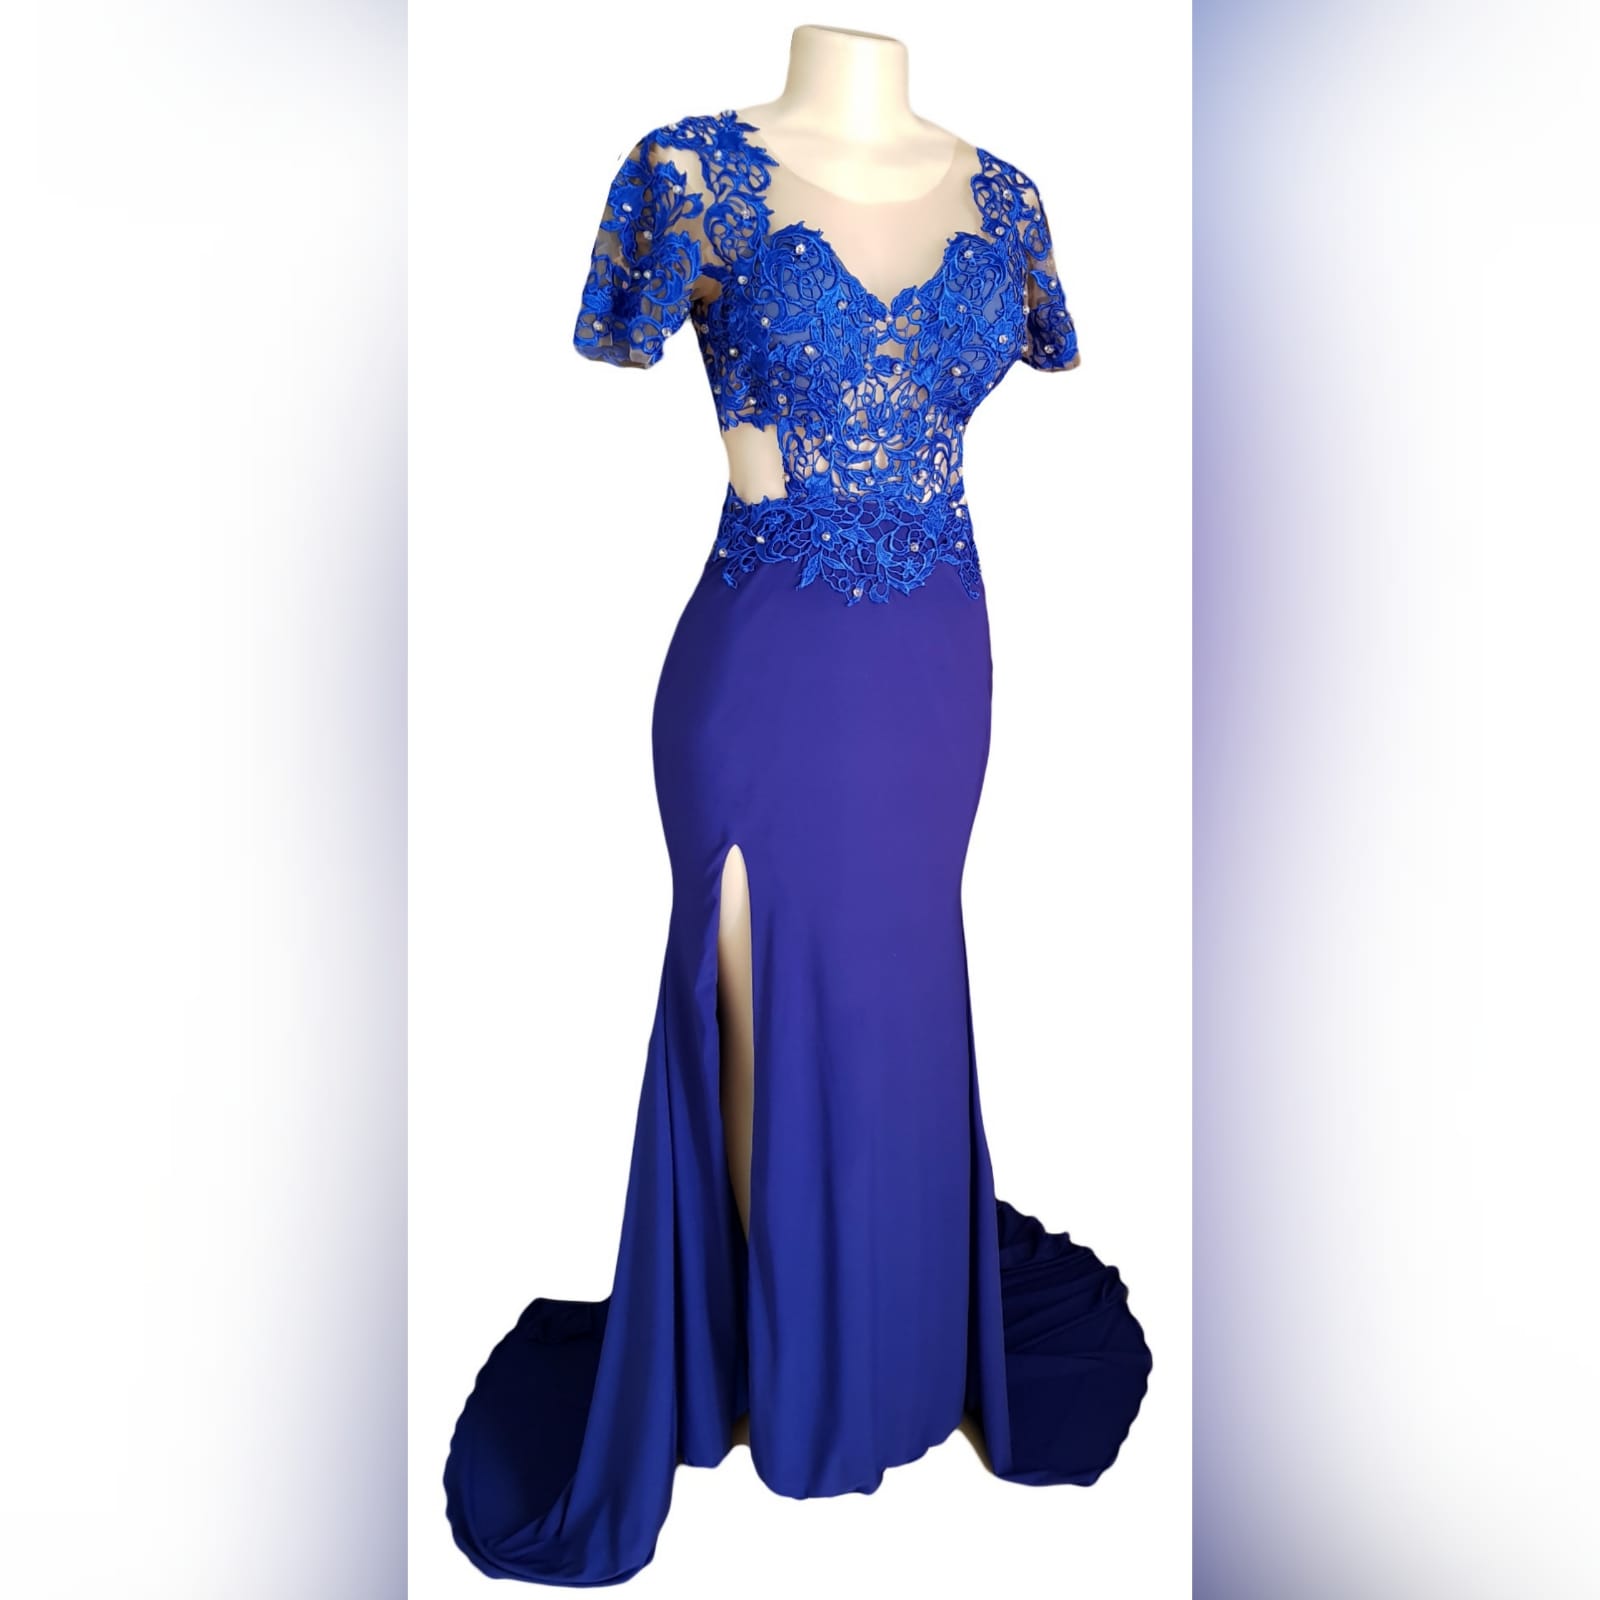 Royal blue shimmer long prom dress 6 royal blue shimmer long prom dress with a lace illusion bodice, side tummy & back opening with a sweetheart neckline. Slit and a train. Lace detailed with gold beads.